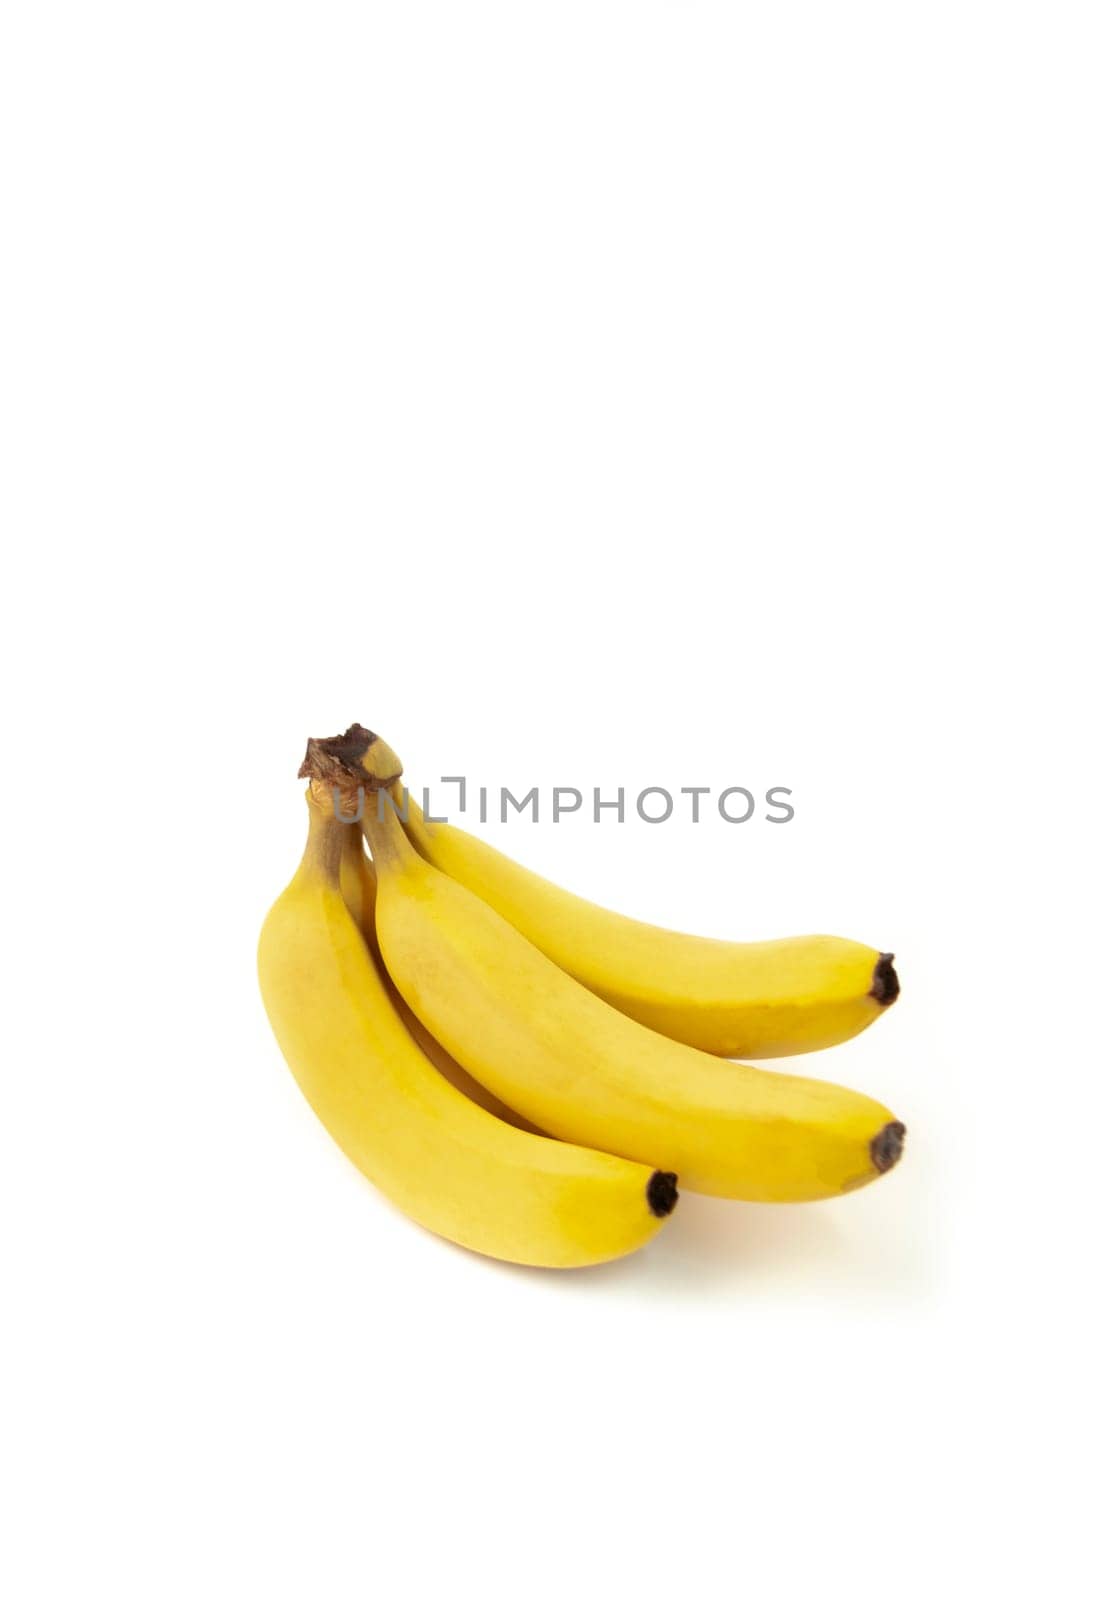 Three yellow bananas are sitting on a white background by Alla_Morozova93